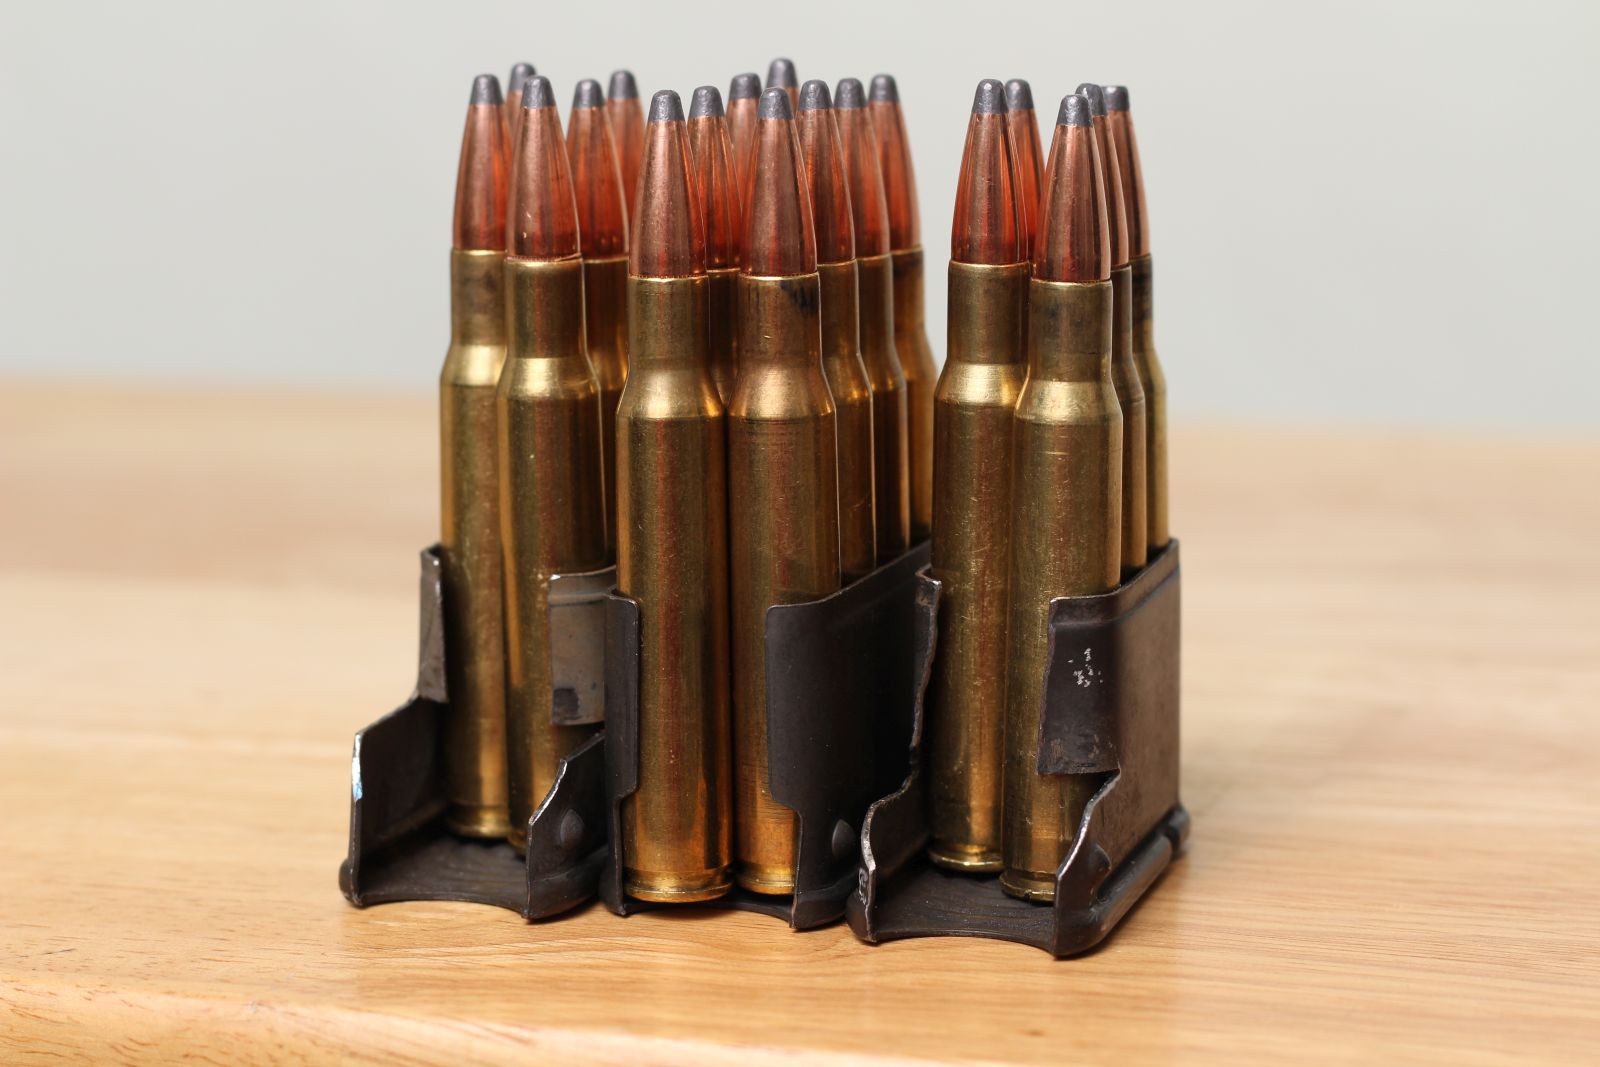 How to Make Your Own 5 Round Garand Clips